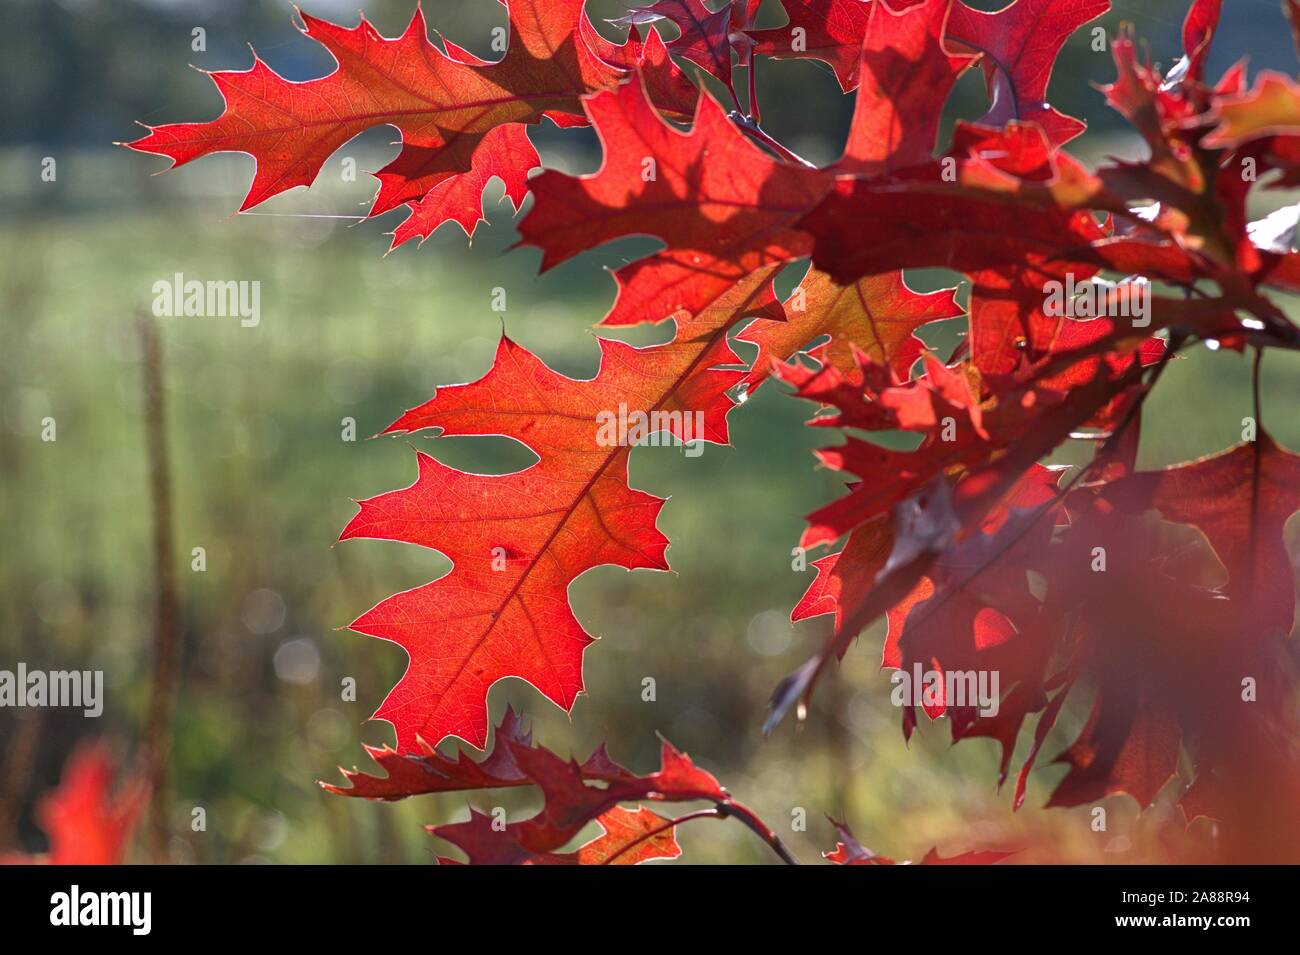 Schleswig, Deutschland. 31st Oct, 2019. 31.10.2019, autumnally colorful leaves of a scarlet oak (Quercus coccinea) in a beautiful autumn weather in Schleswig. Rosids, Eurosiden I, Order: Beech (Fagales), Family: Beech trees (Fagaceae), Genus: Oaks (Quercus), Species: Scarlet oak | usage worldwide Credit: dpa/Alamy Live News Stock Photo